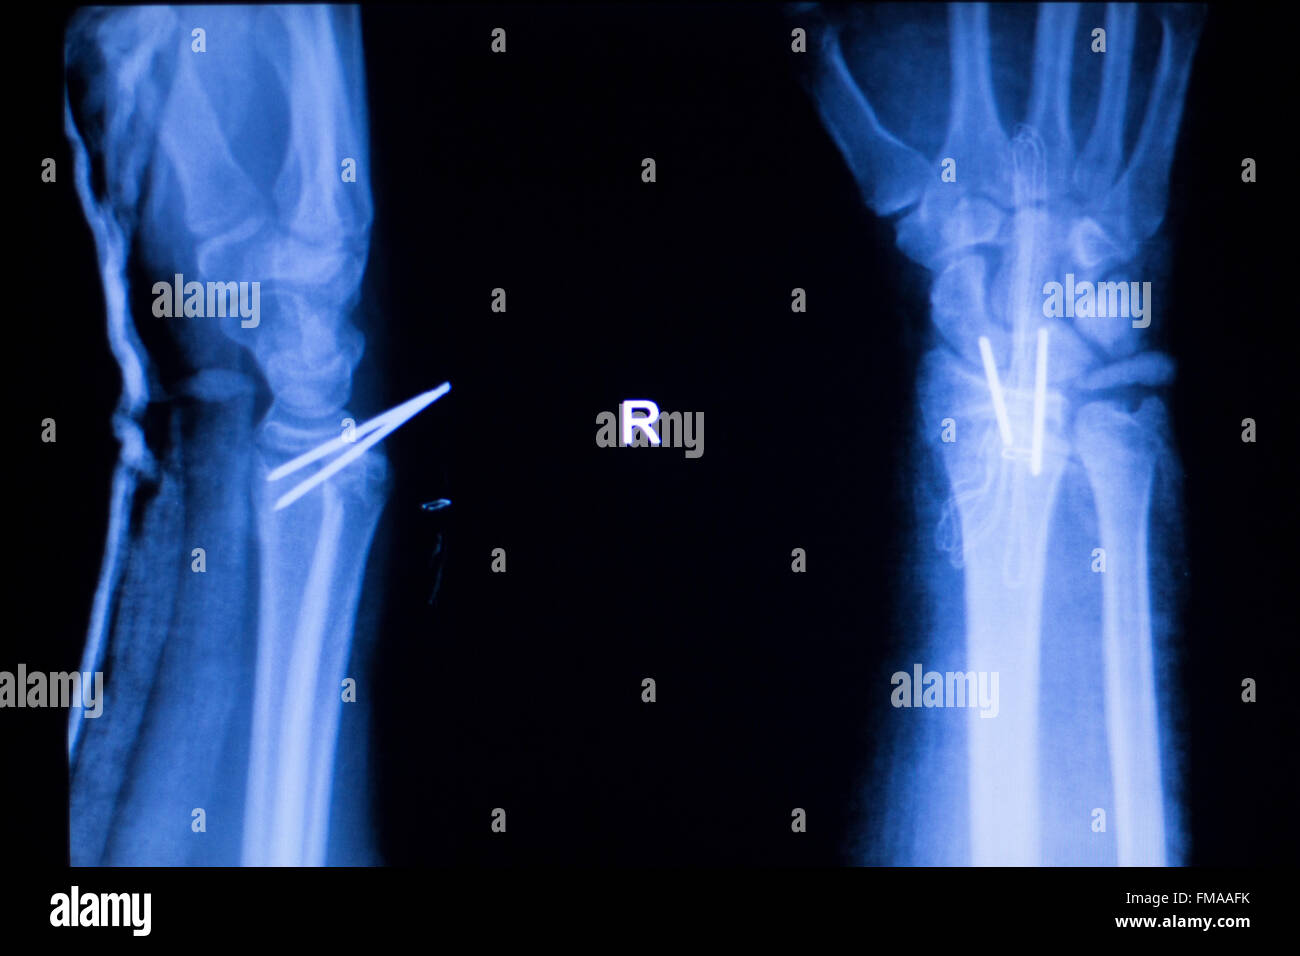 Forearm orthopedic titanium metal replacement implant xray scan test results. Stock Photo